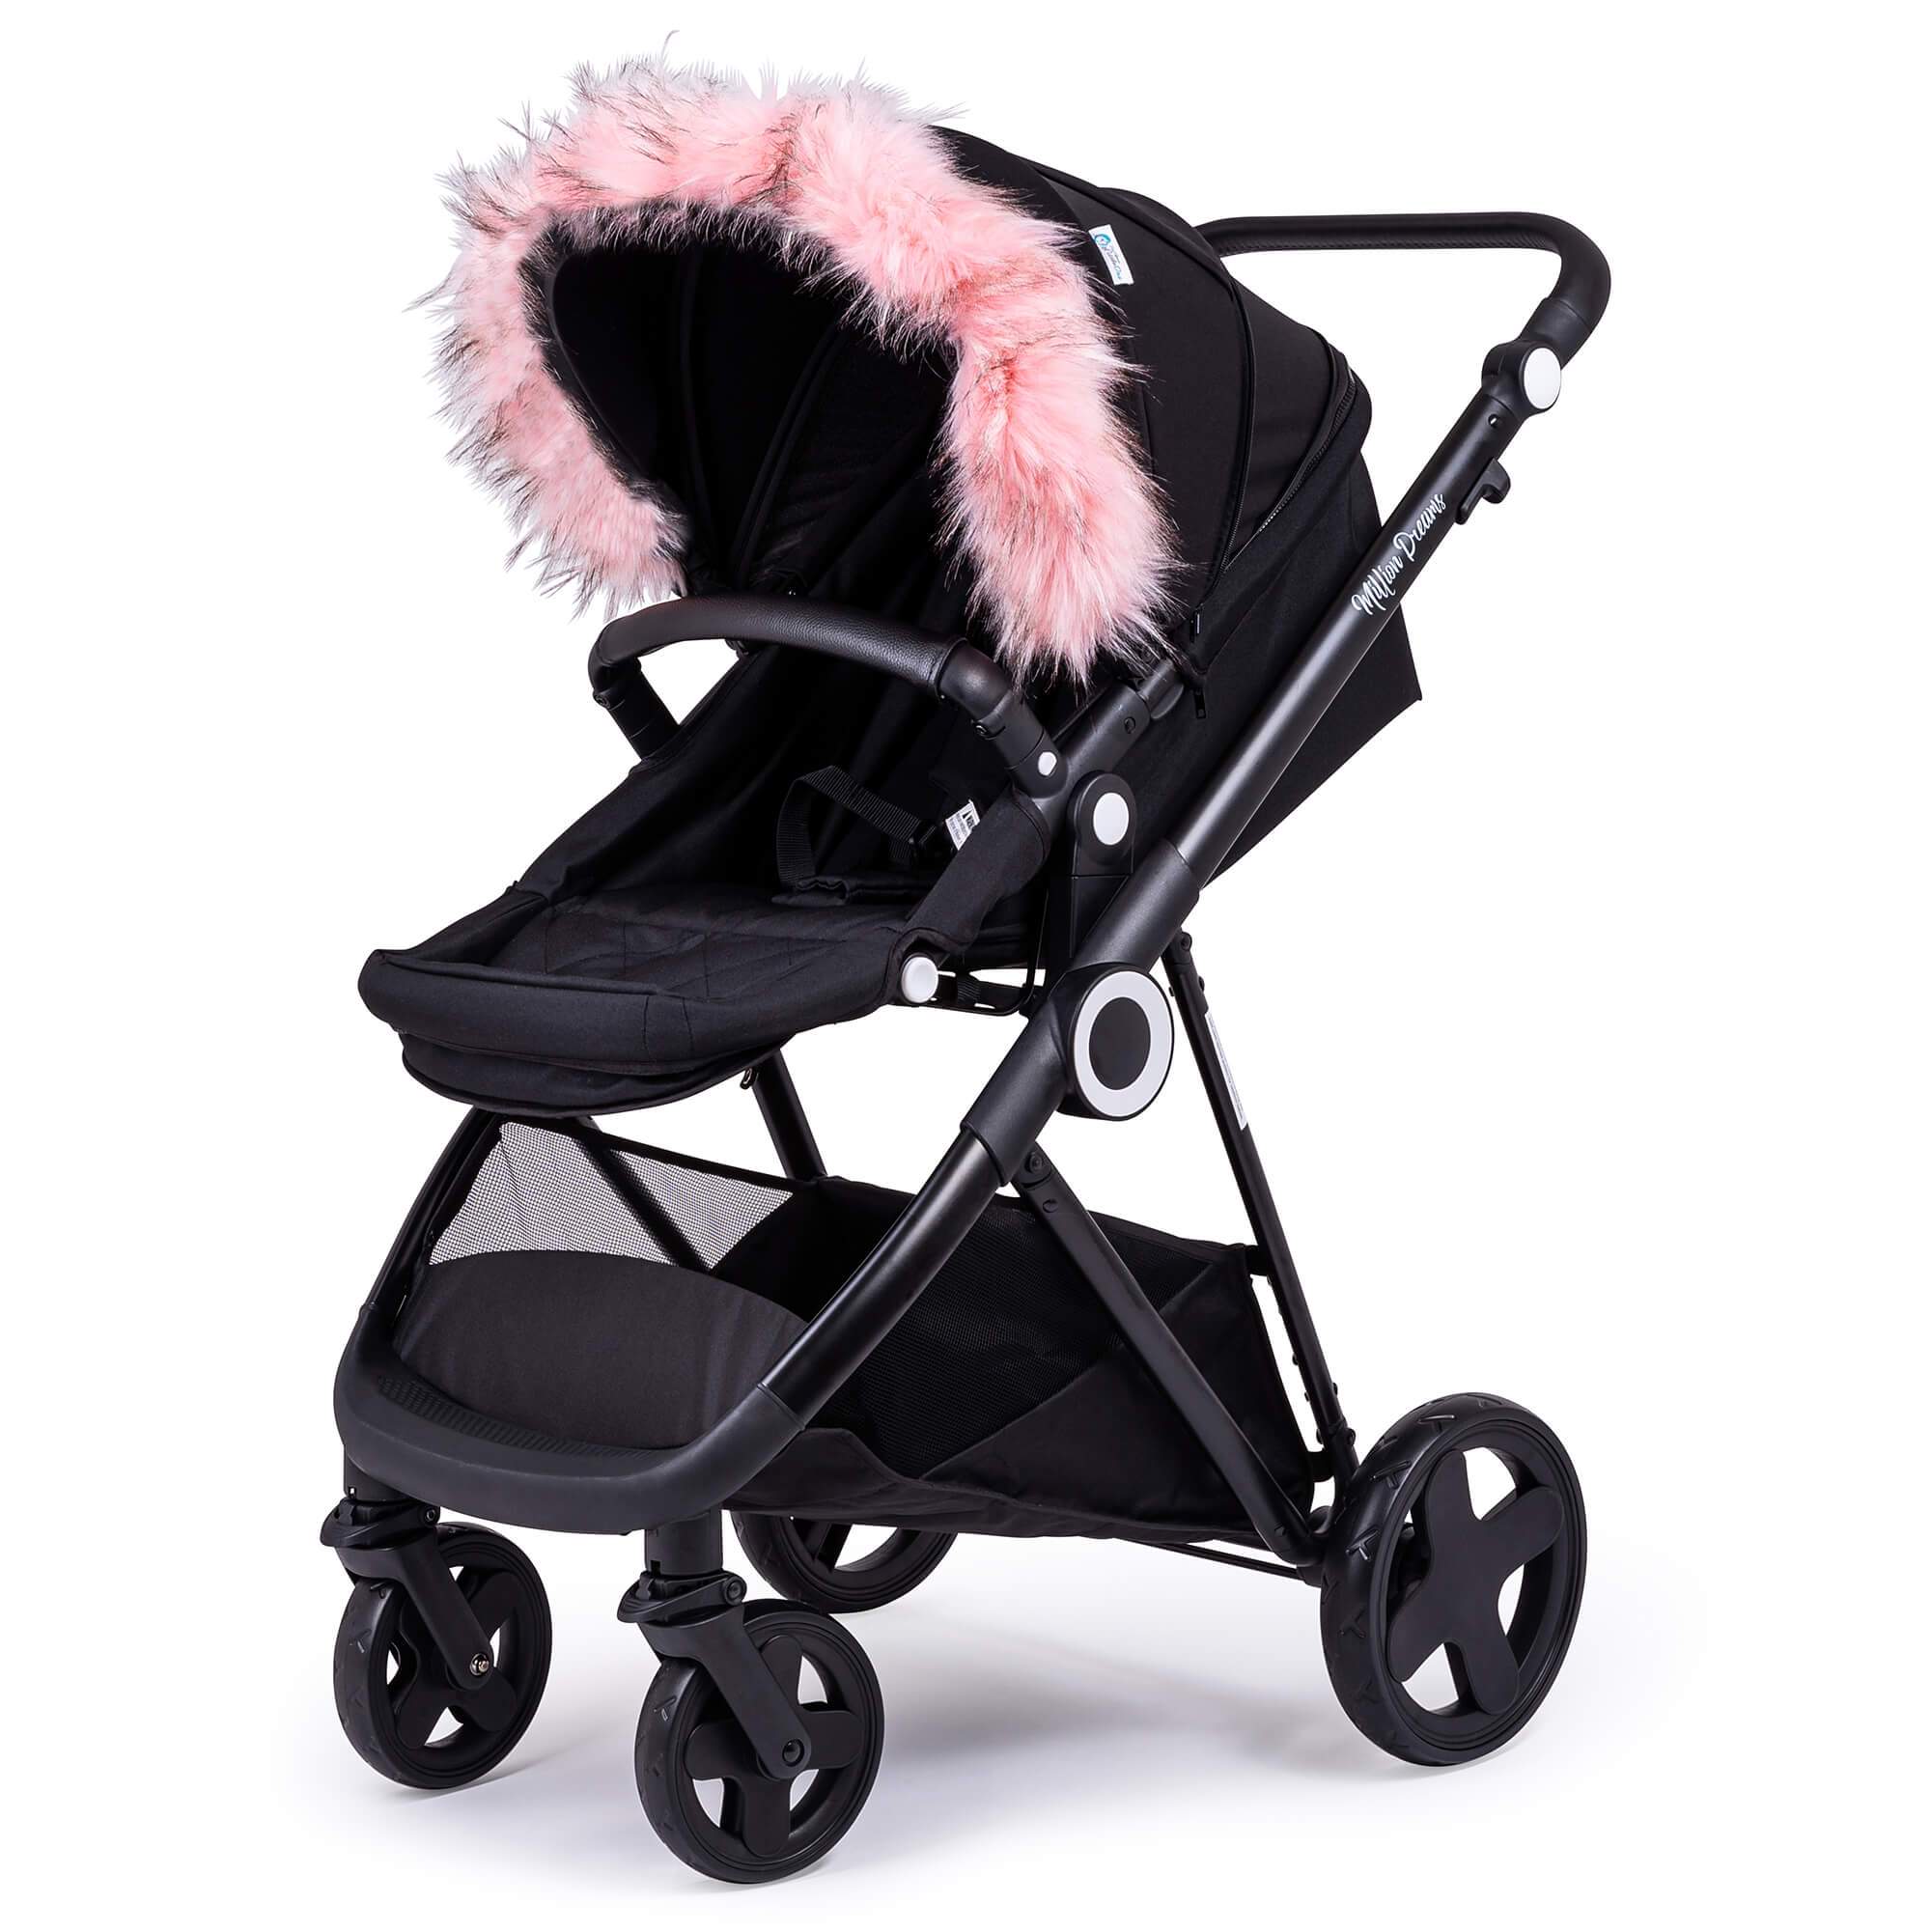 Pram Fur Hood Trim Attachment for Pushchair Compatible with Cam - Light Pink / Fits All Models | For Your Little One